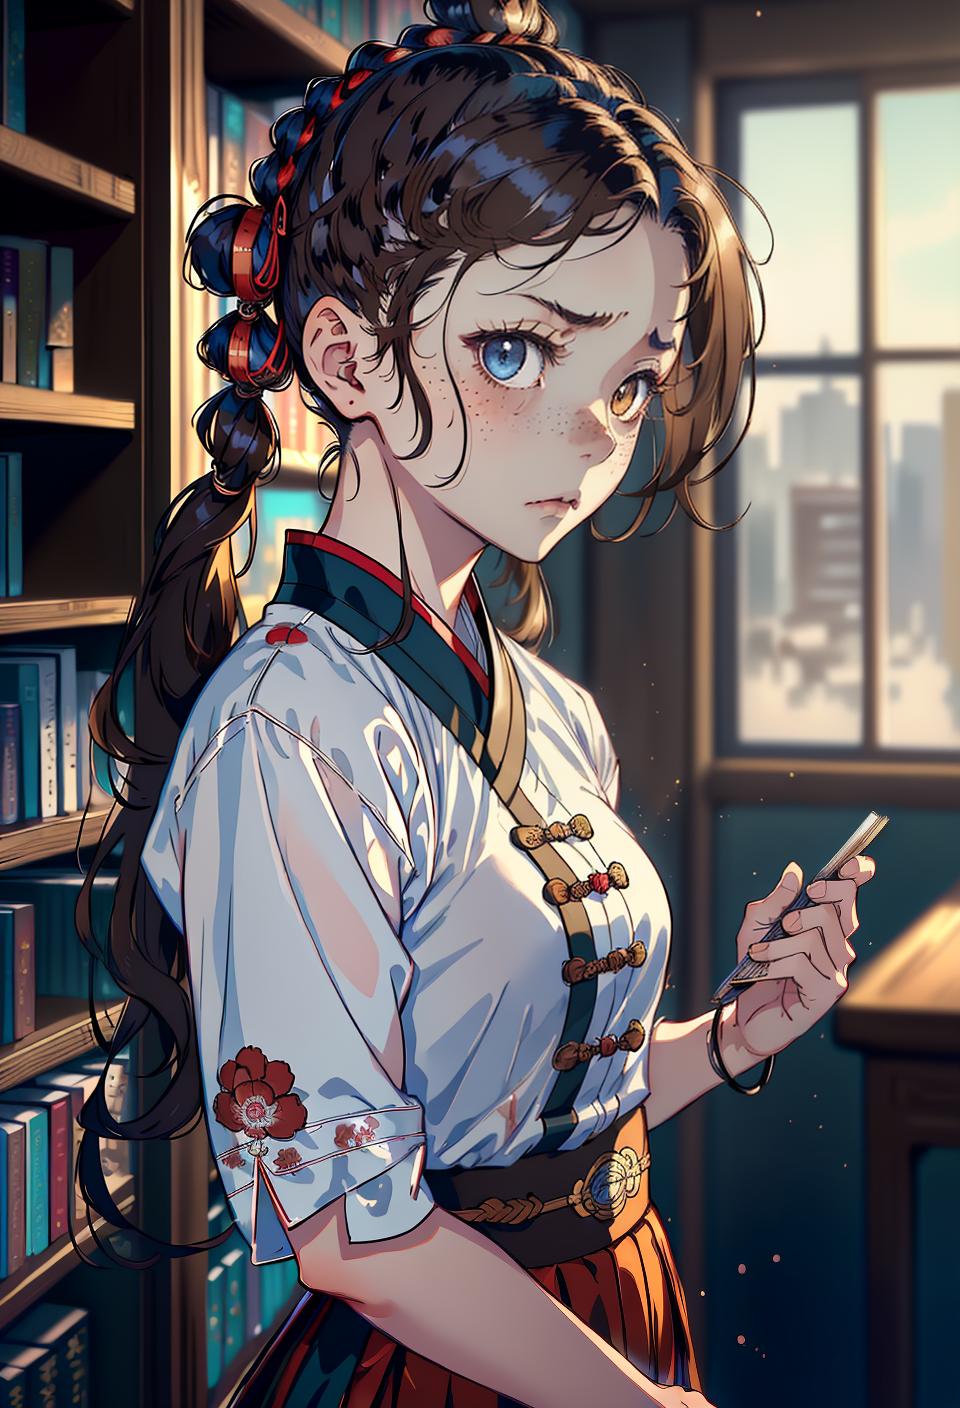  ((trending, highres, masterpiece, cinematic shot)), 1girl, chibi, female chinese outfit, library scene, medium-length wavy brown hair, mohawk hairstyle, narrow heterochromia eyes, tough personality, sad expression, freckles, fair skin, magical, observant